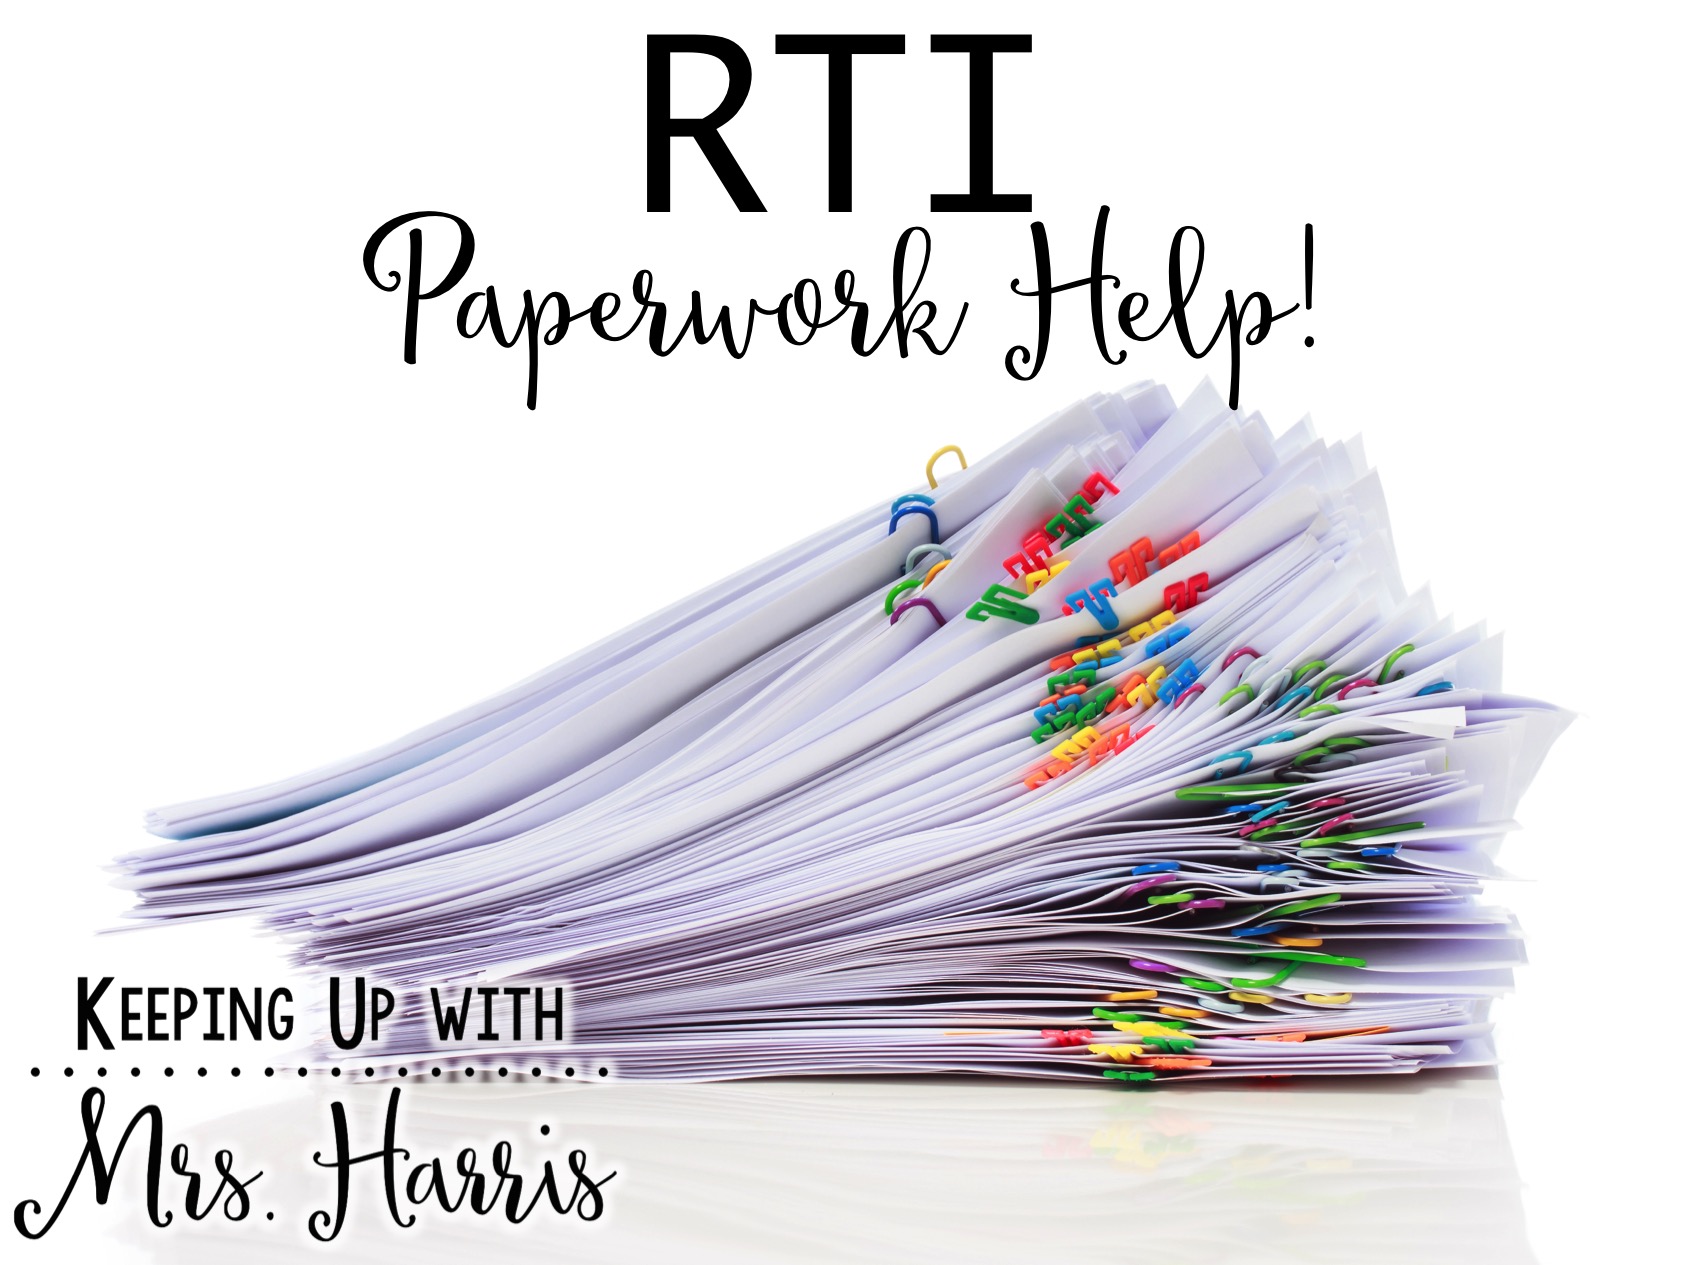 RTI paperwork - help for teachers who struggle with wording on paperwork forms.